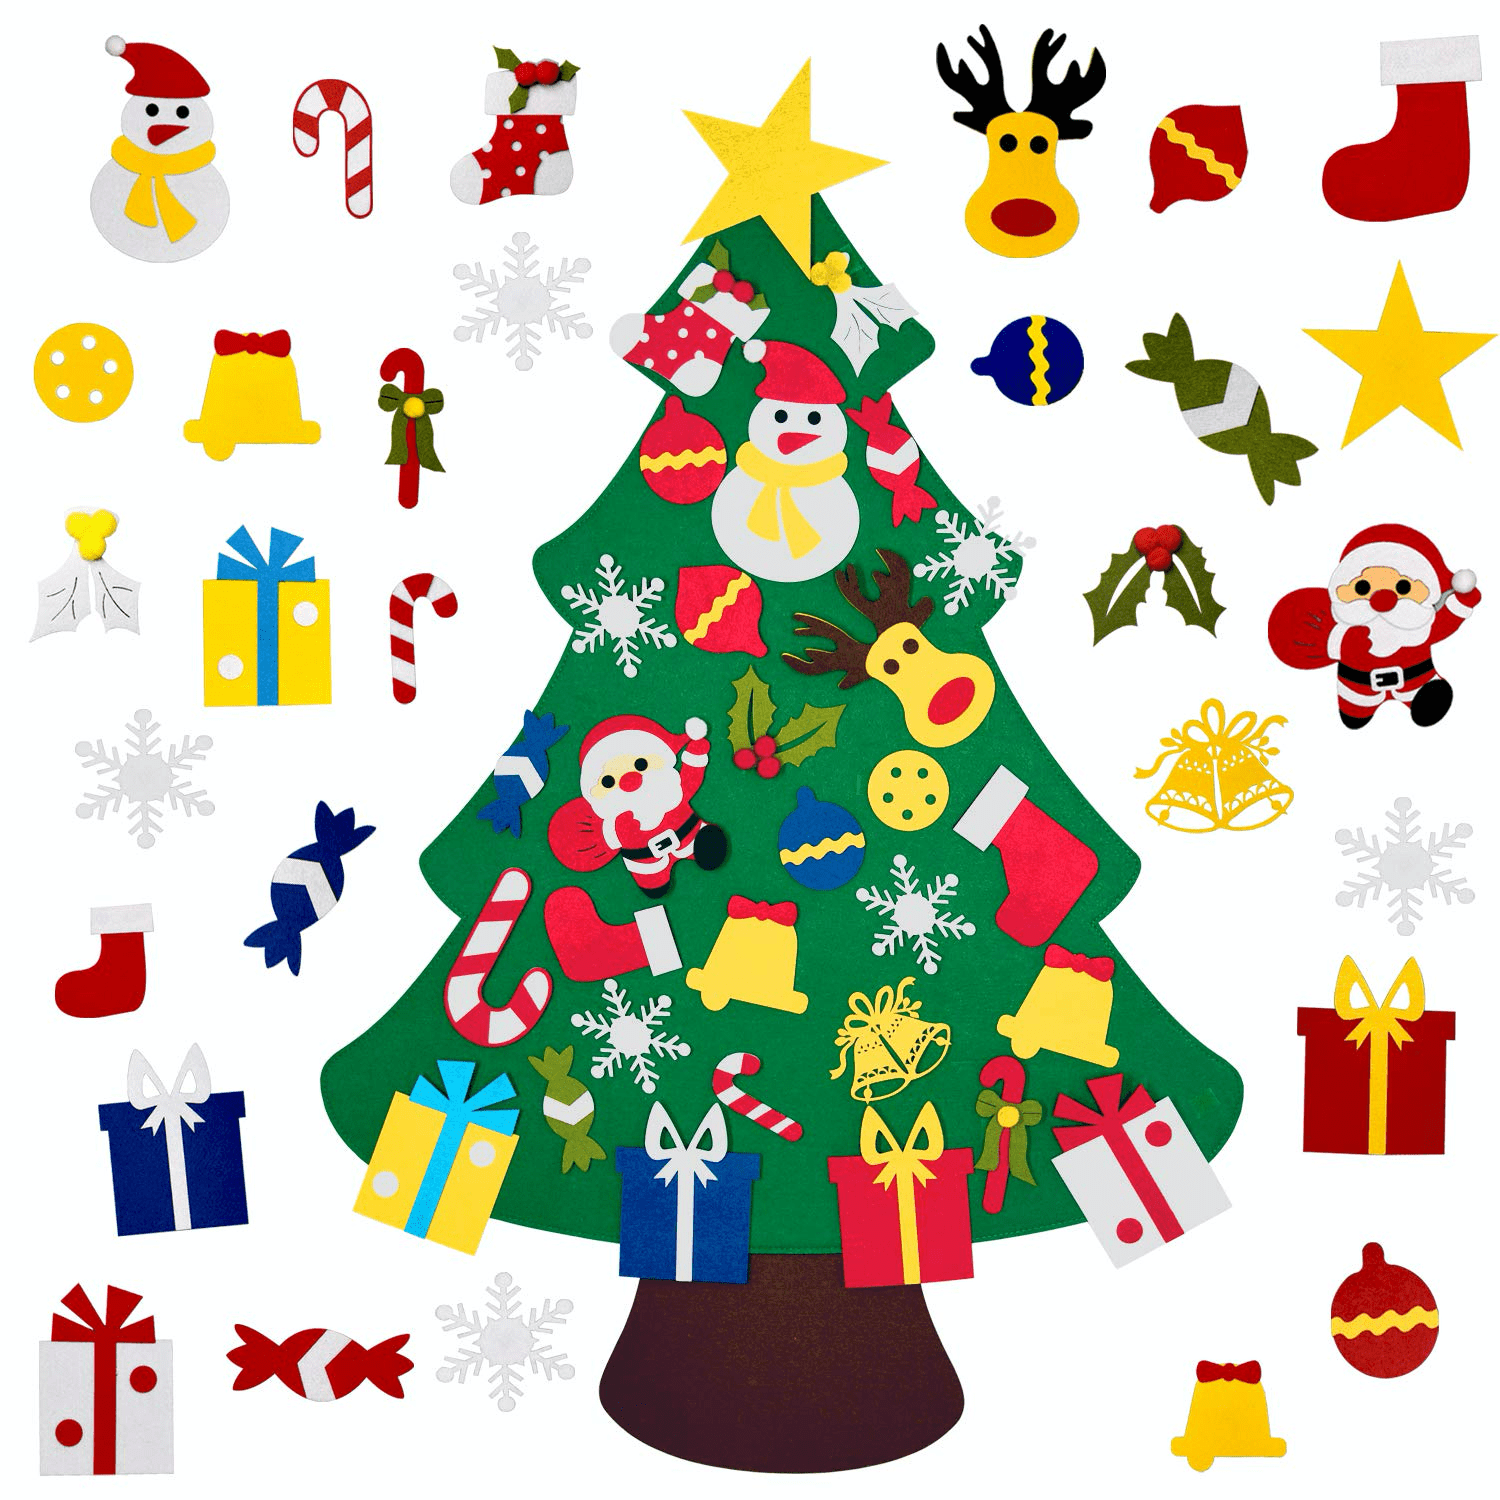 CCINEE 3D DIY Felt Christmas Tree with Detachable Hanging Ornaments Xmas Gifts for Kids Xmas Gifts Home Door Decoration